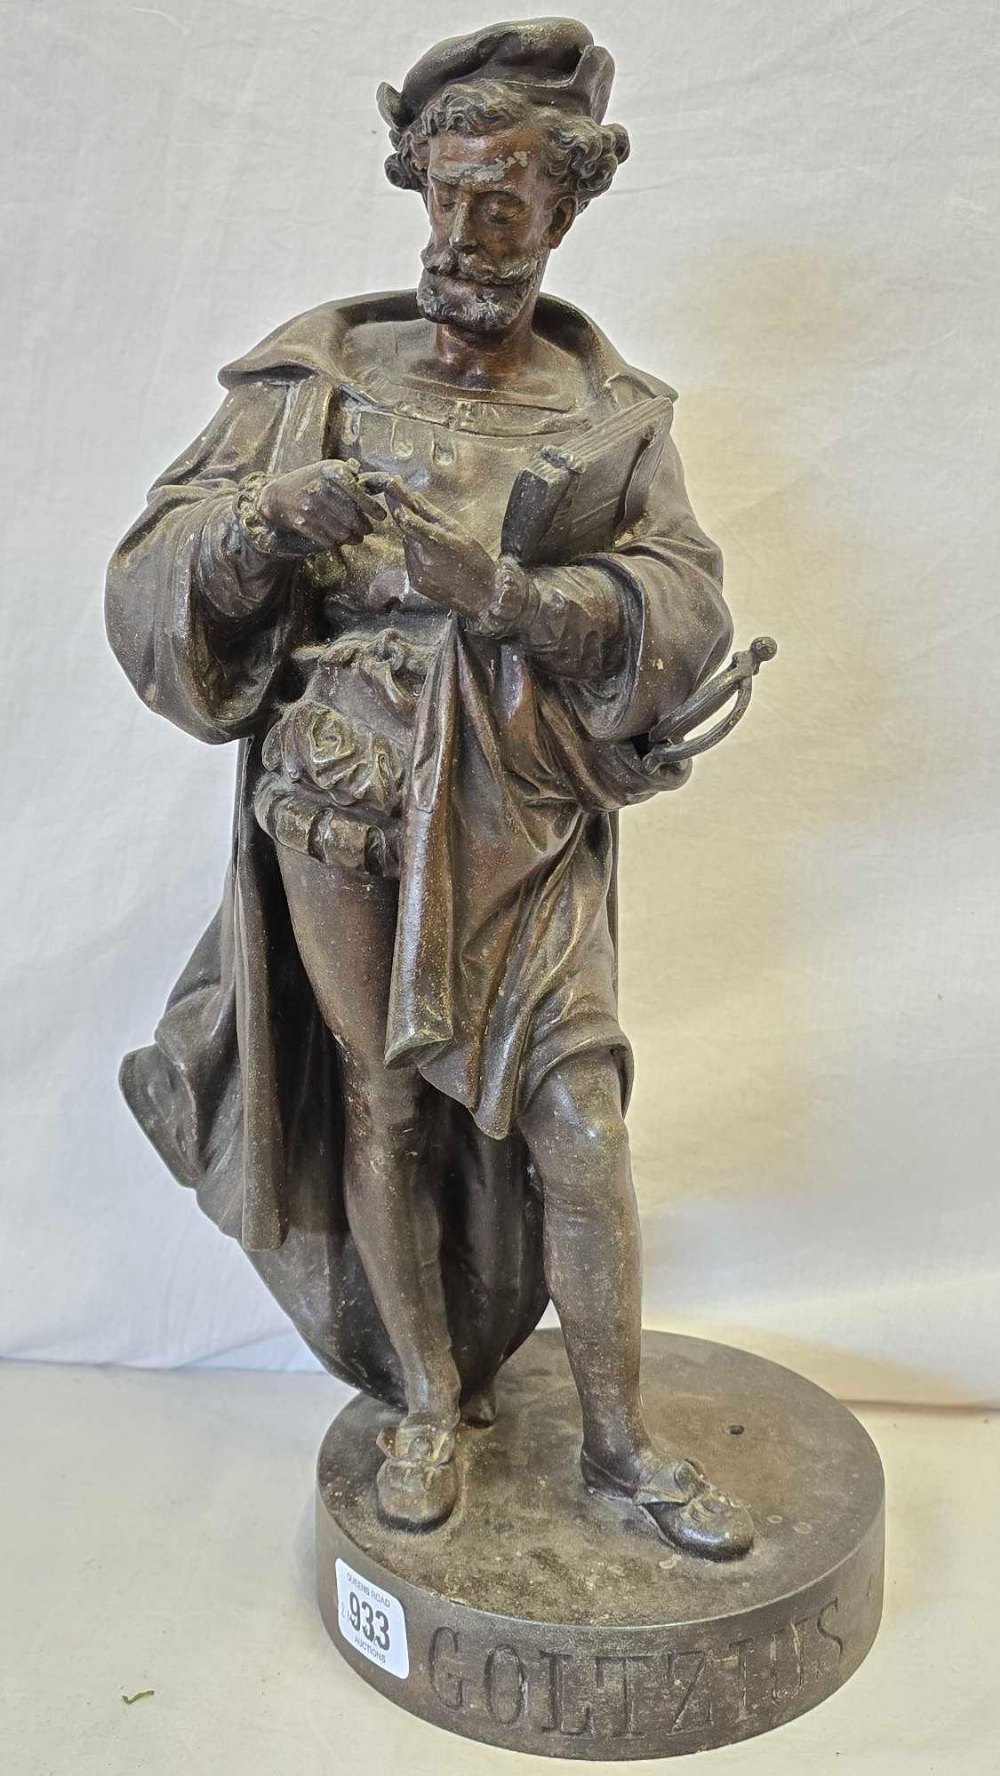 SPELTER FIGURE OF A MAN MARKED GOLTZIUS APPROX 17" TALL